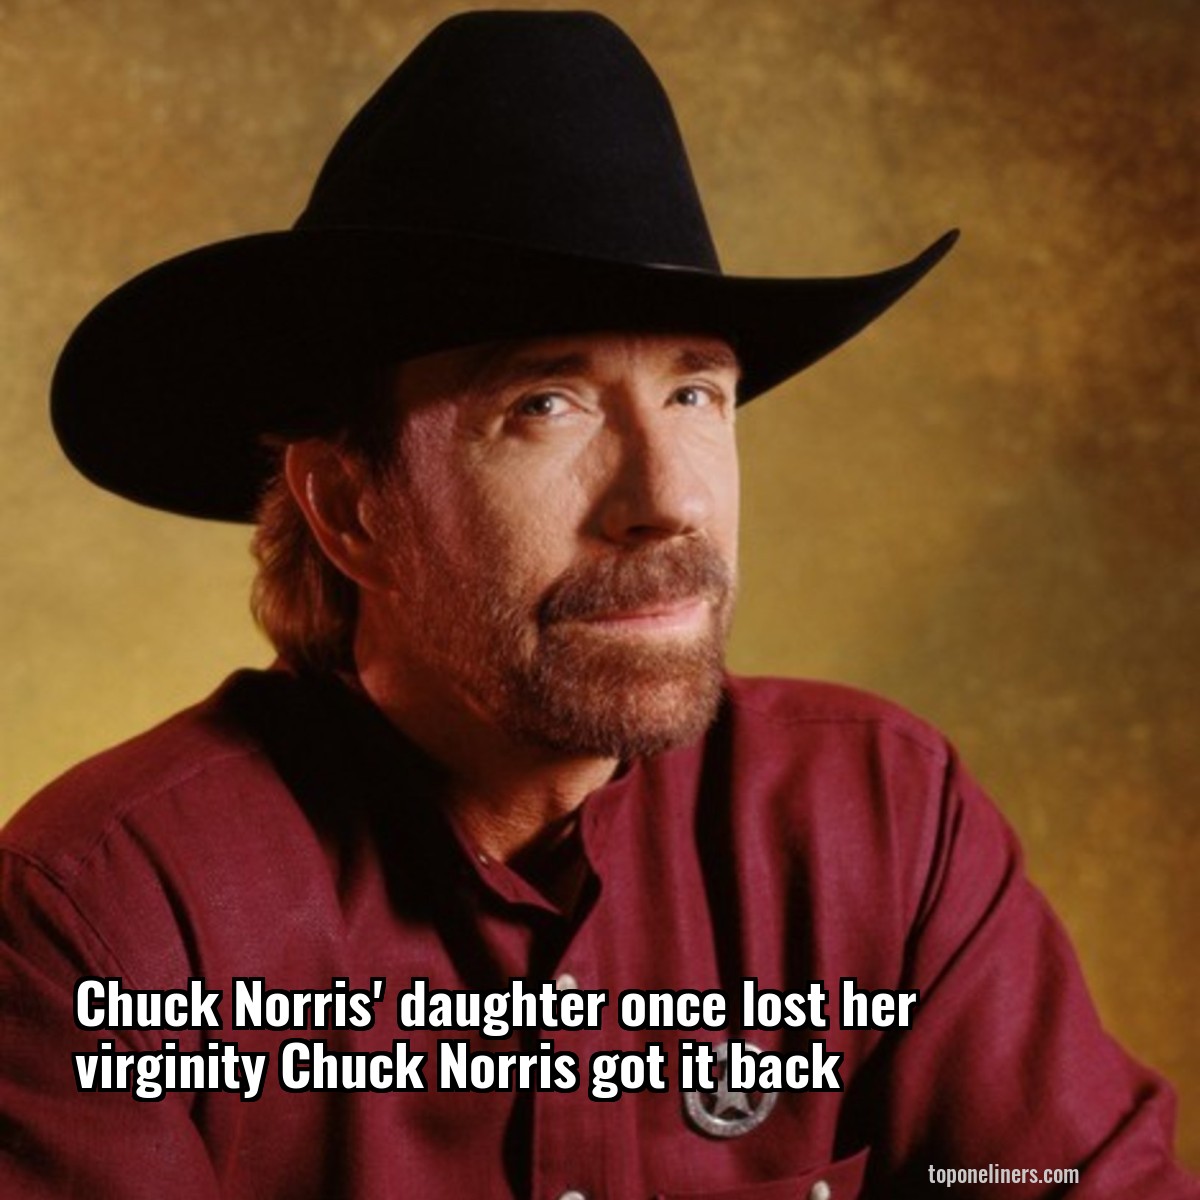 Chuck Norris' daughter once lost her virginity Chuck Norris got it back